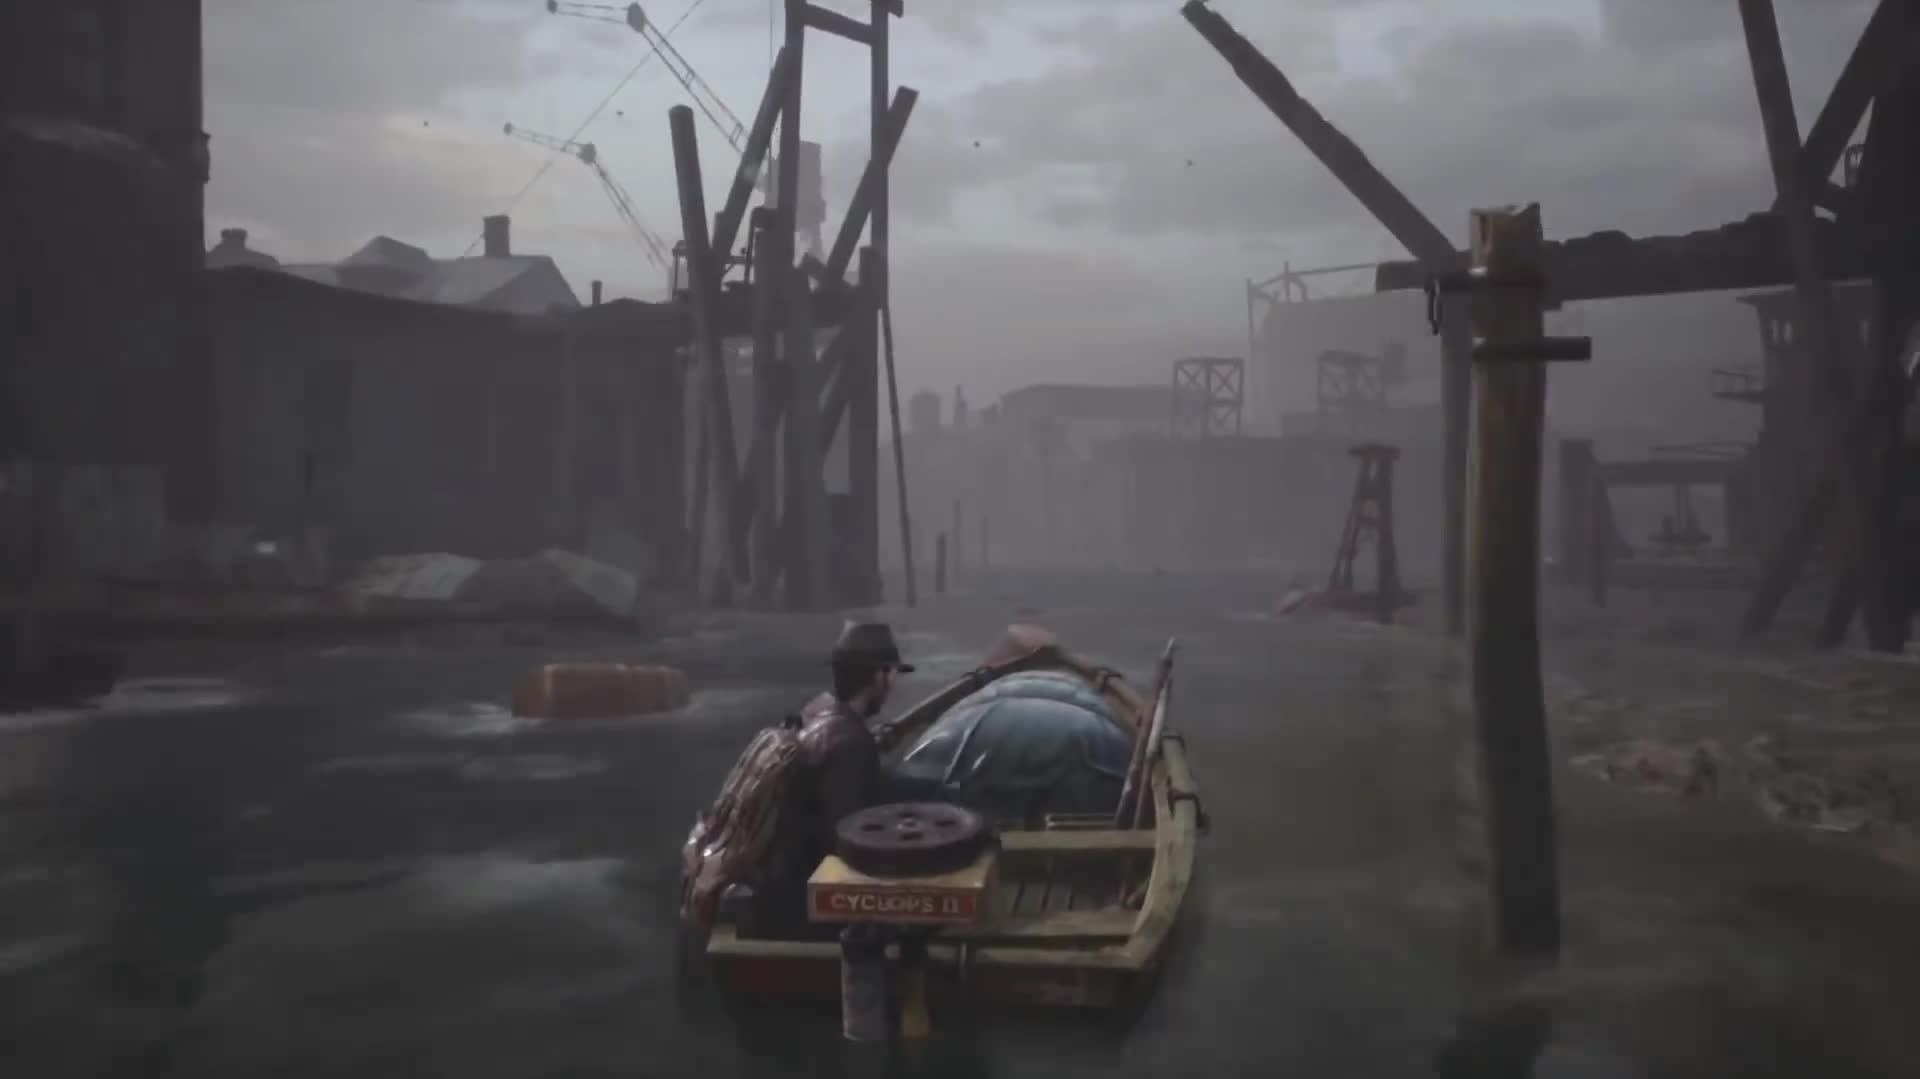 download the sinking city video game for free